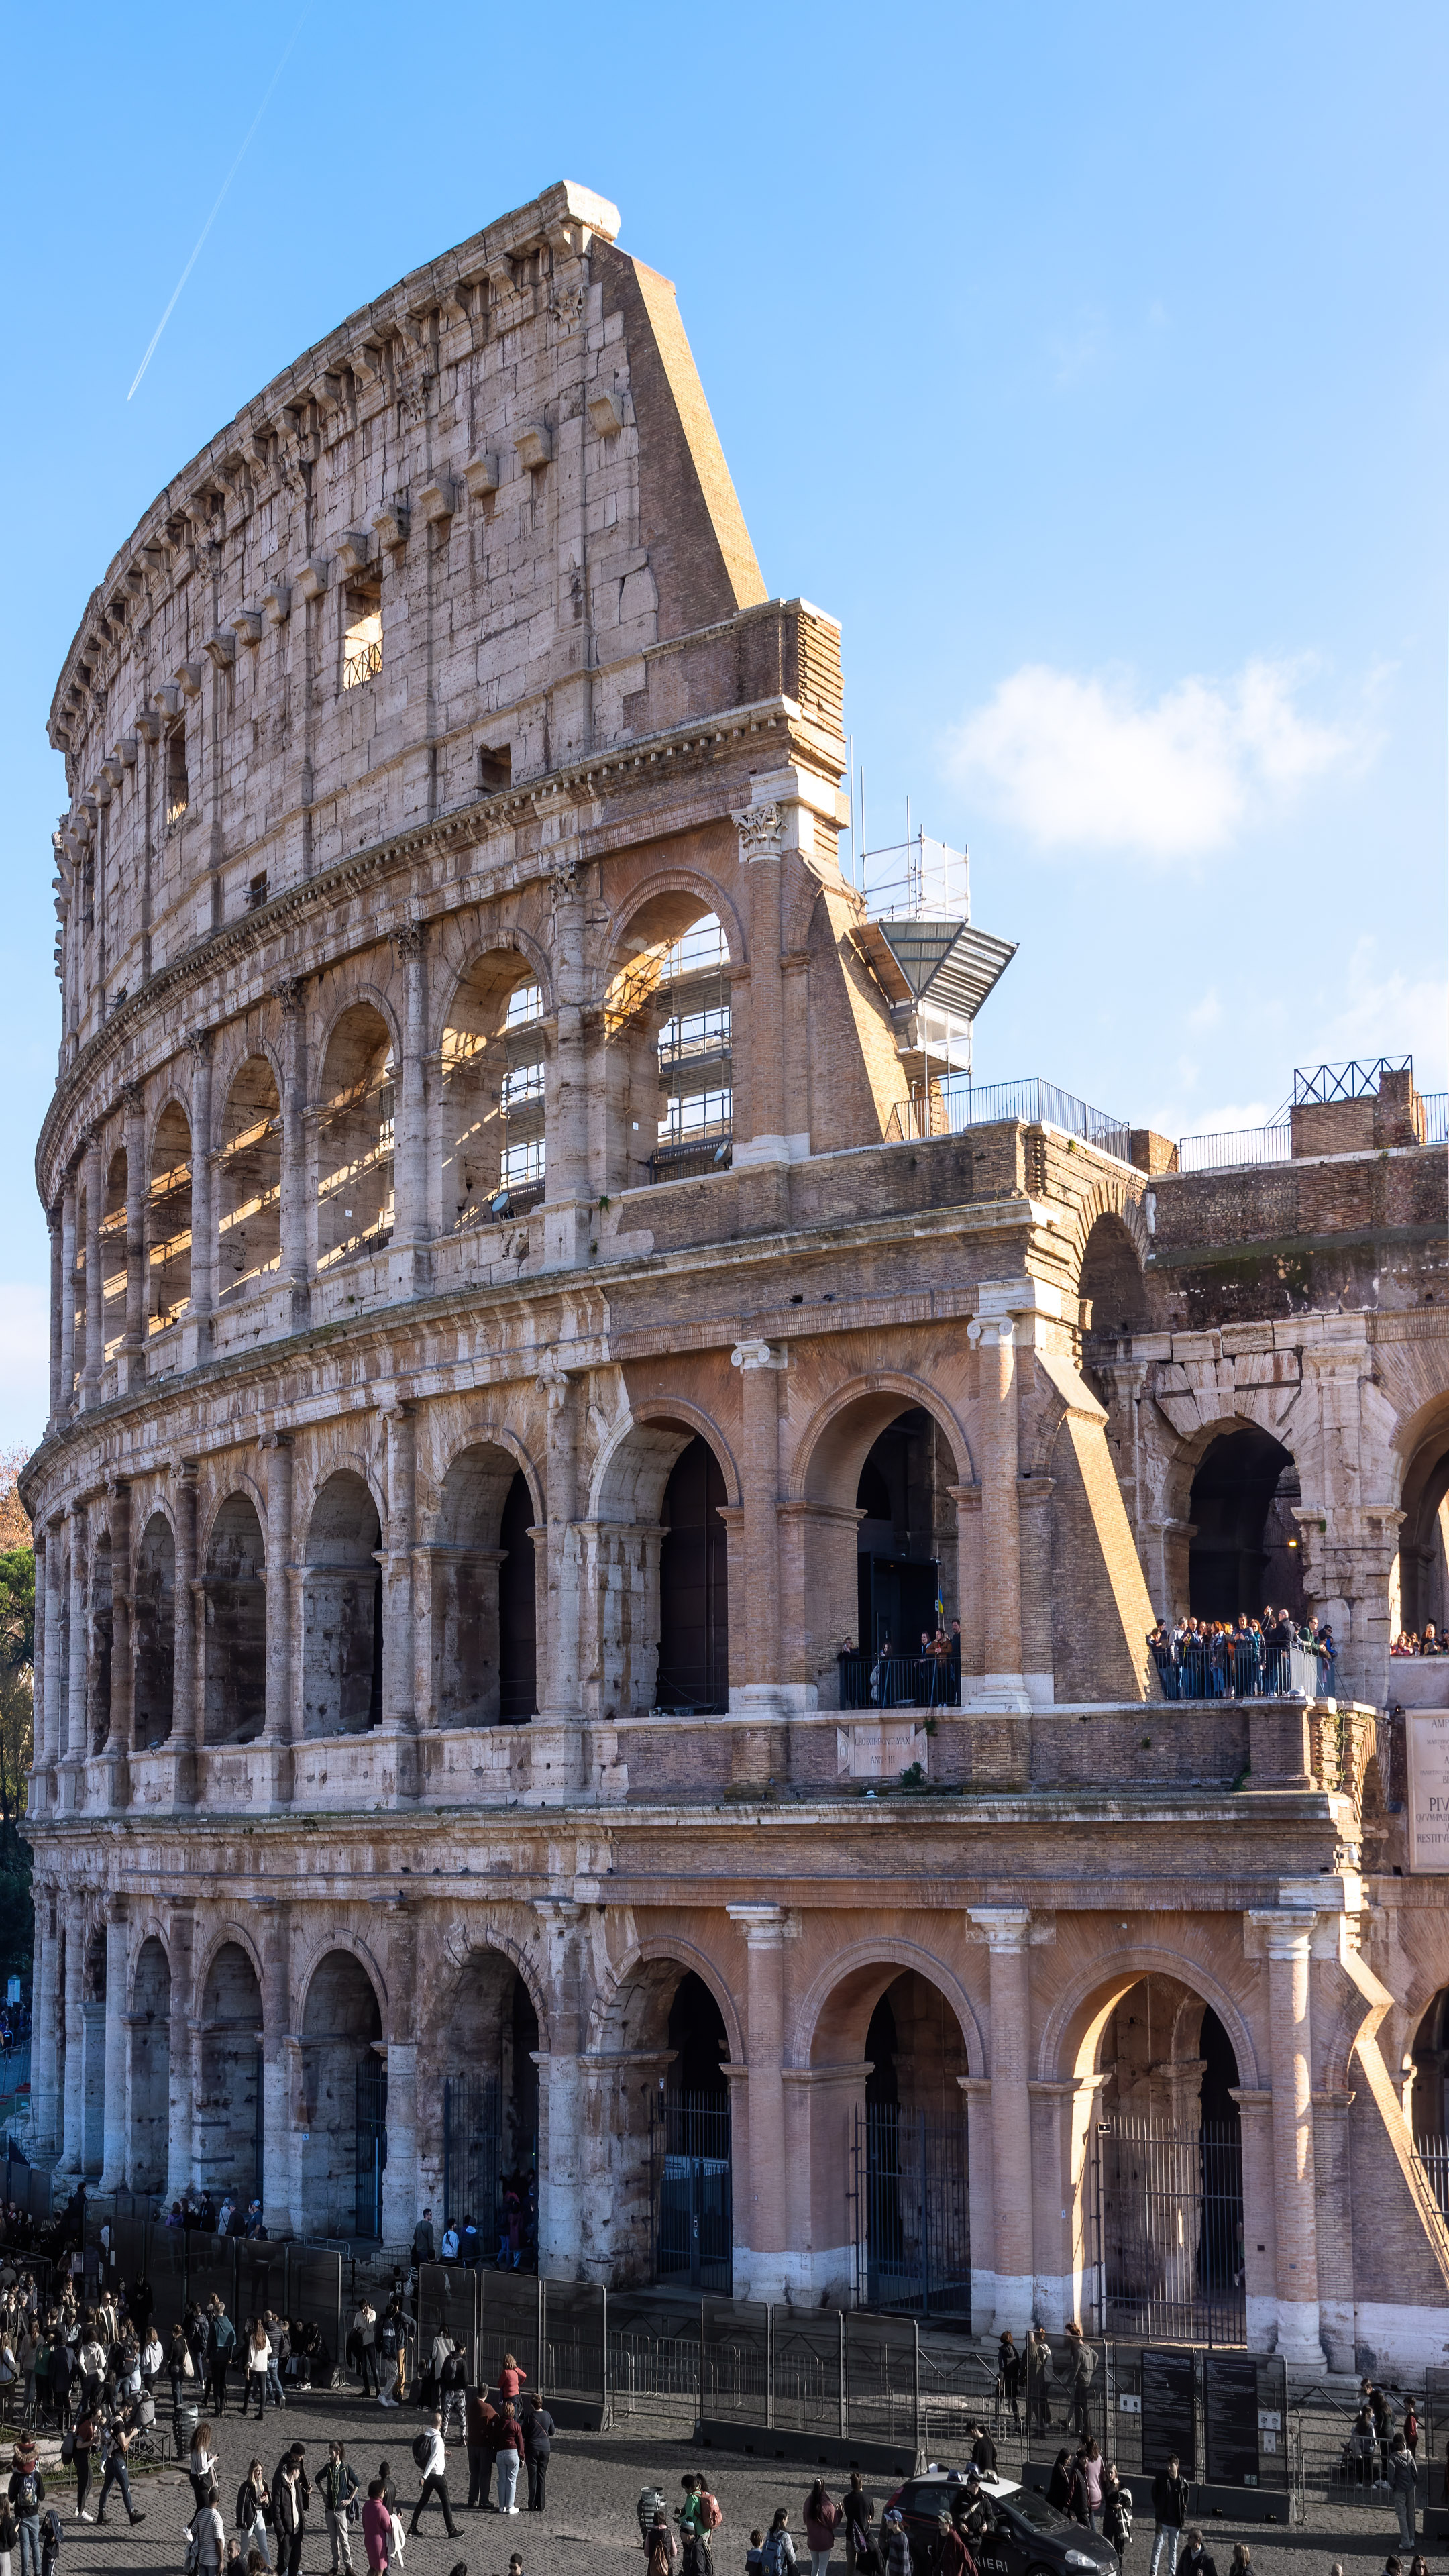 Bring a piece of history to your iPhone with this stunning wallpaper featuring the iconic Colosseum in Rome. The high-quality image captures the grandeur and history of this ancient landmark. Download now and add some Roman flair to your phone!